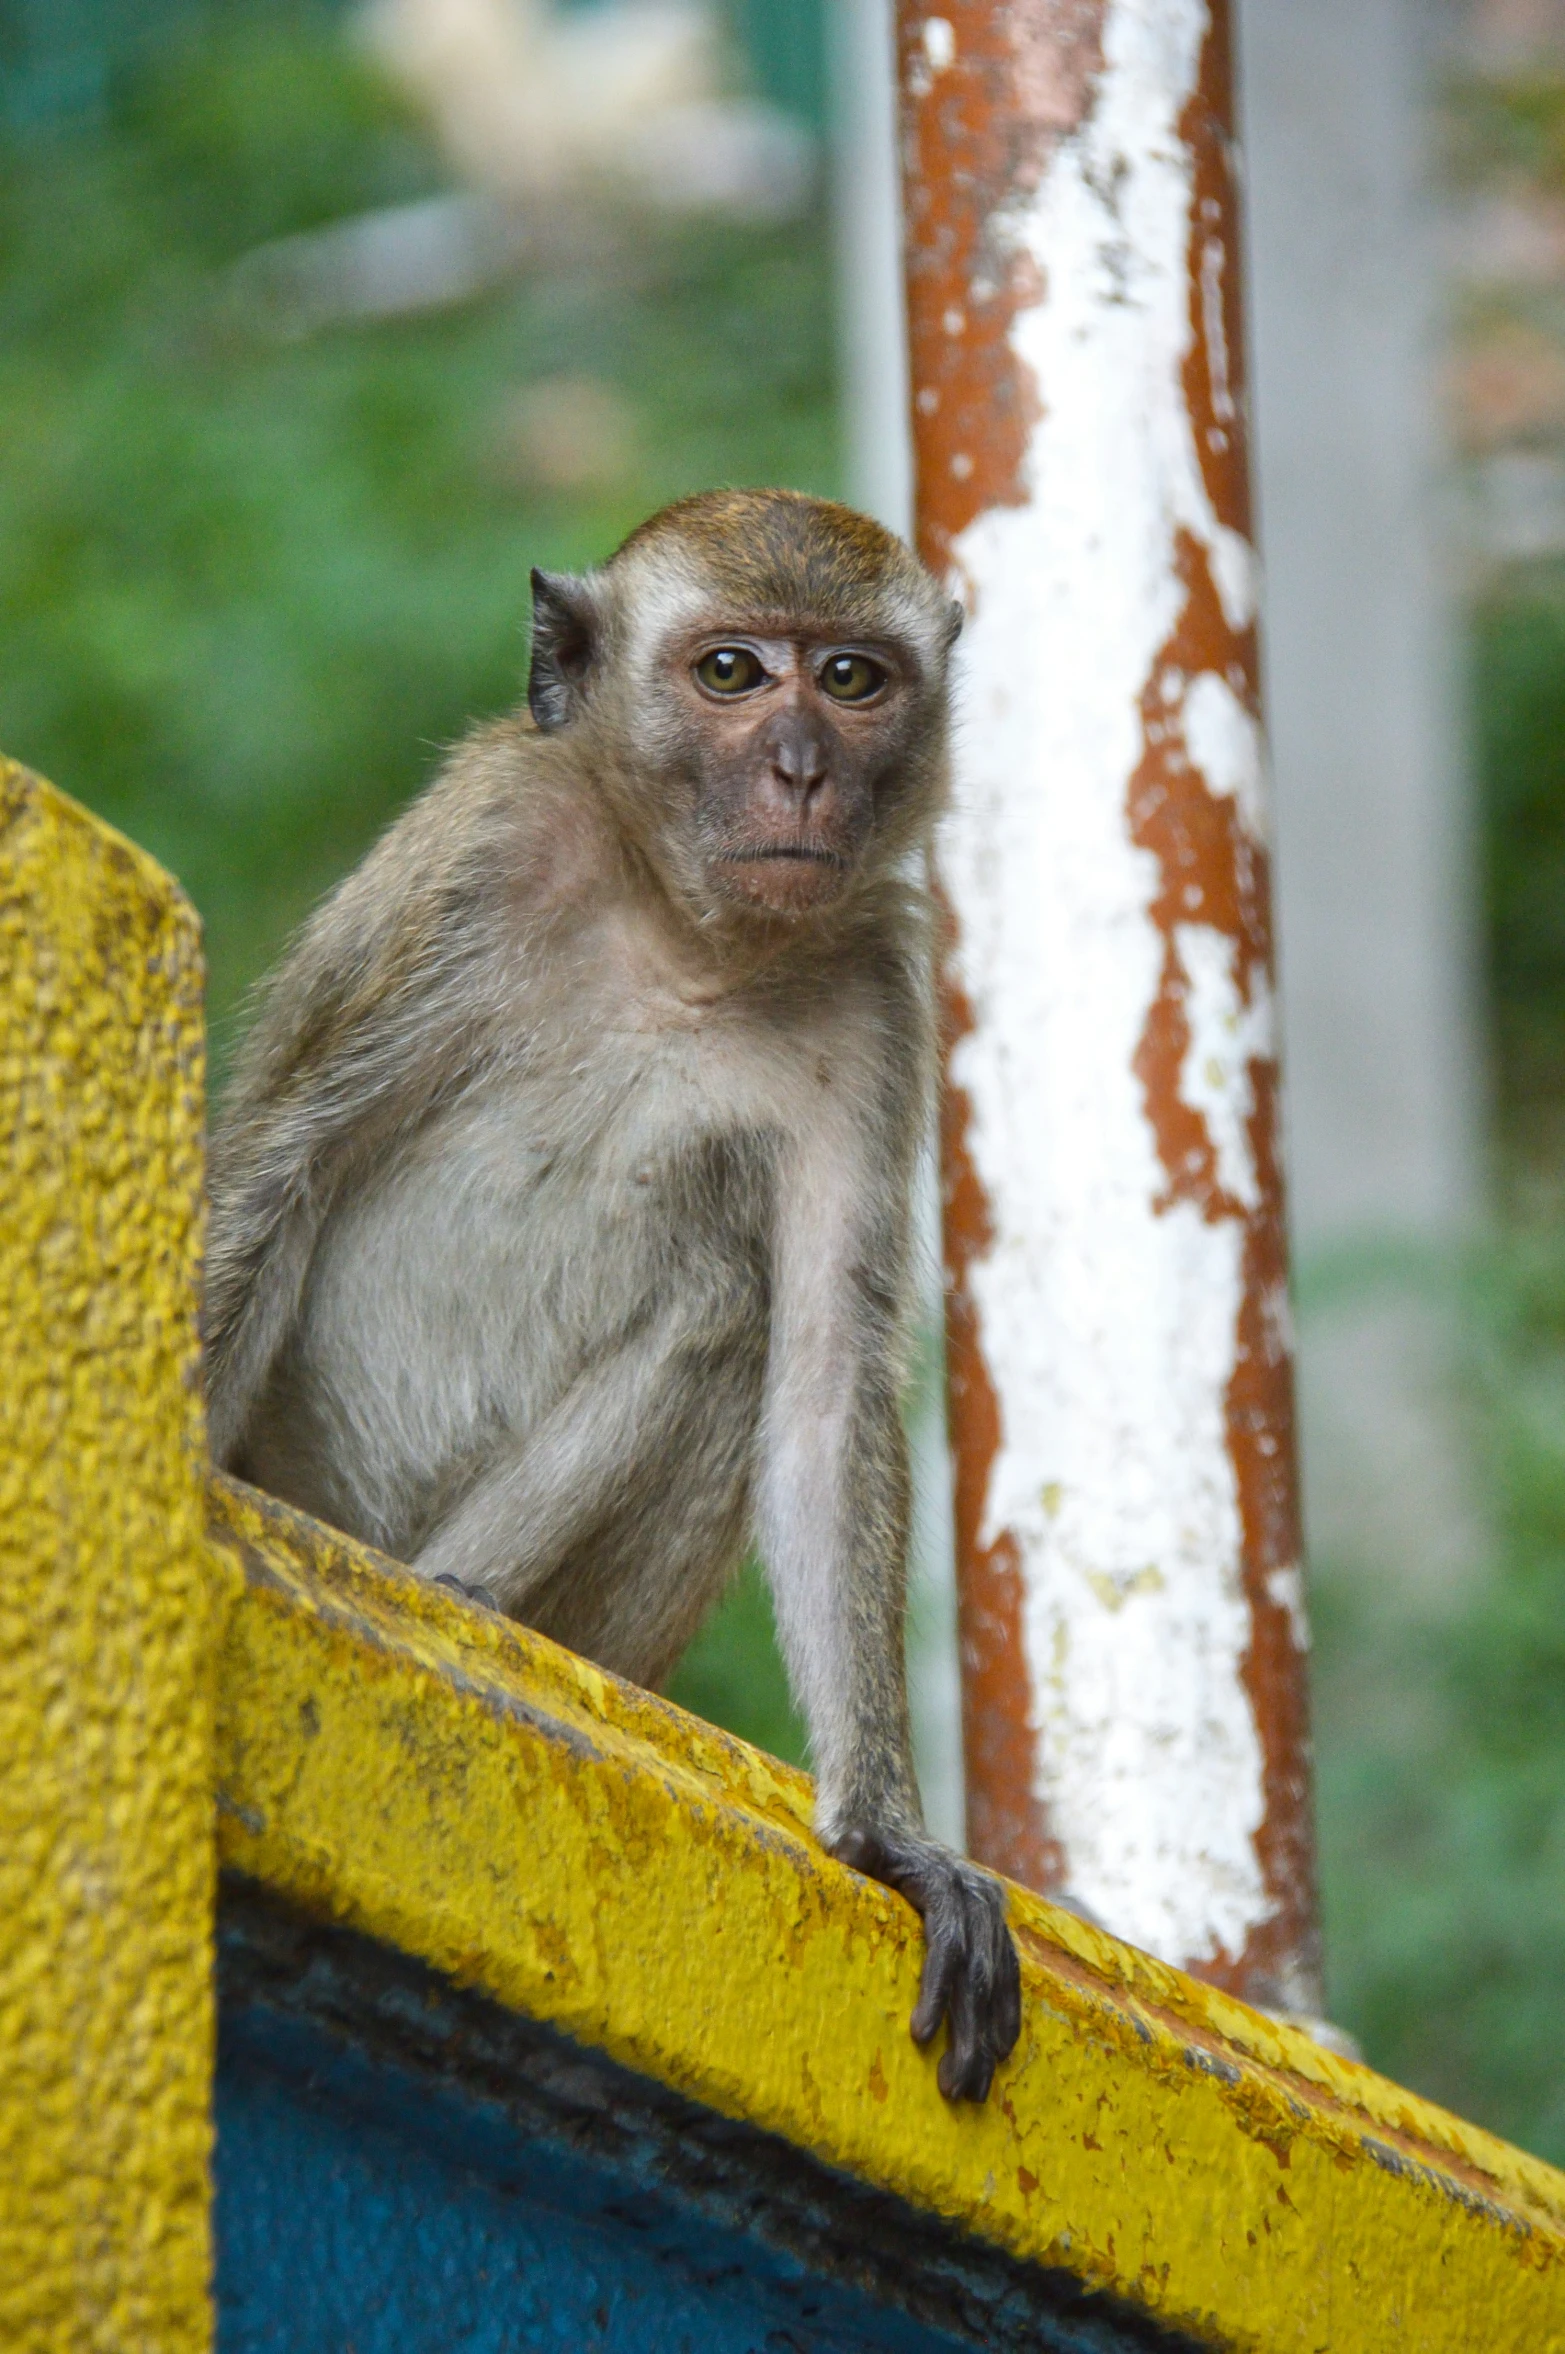 the monkey is standing near a blue and yellow object